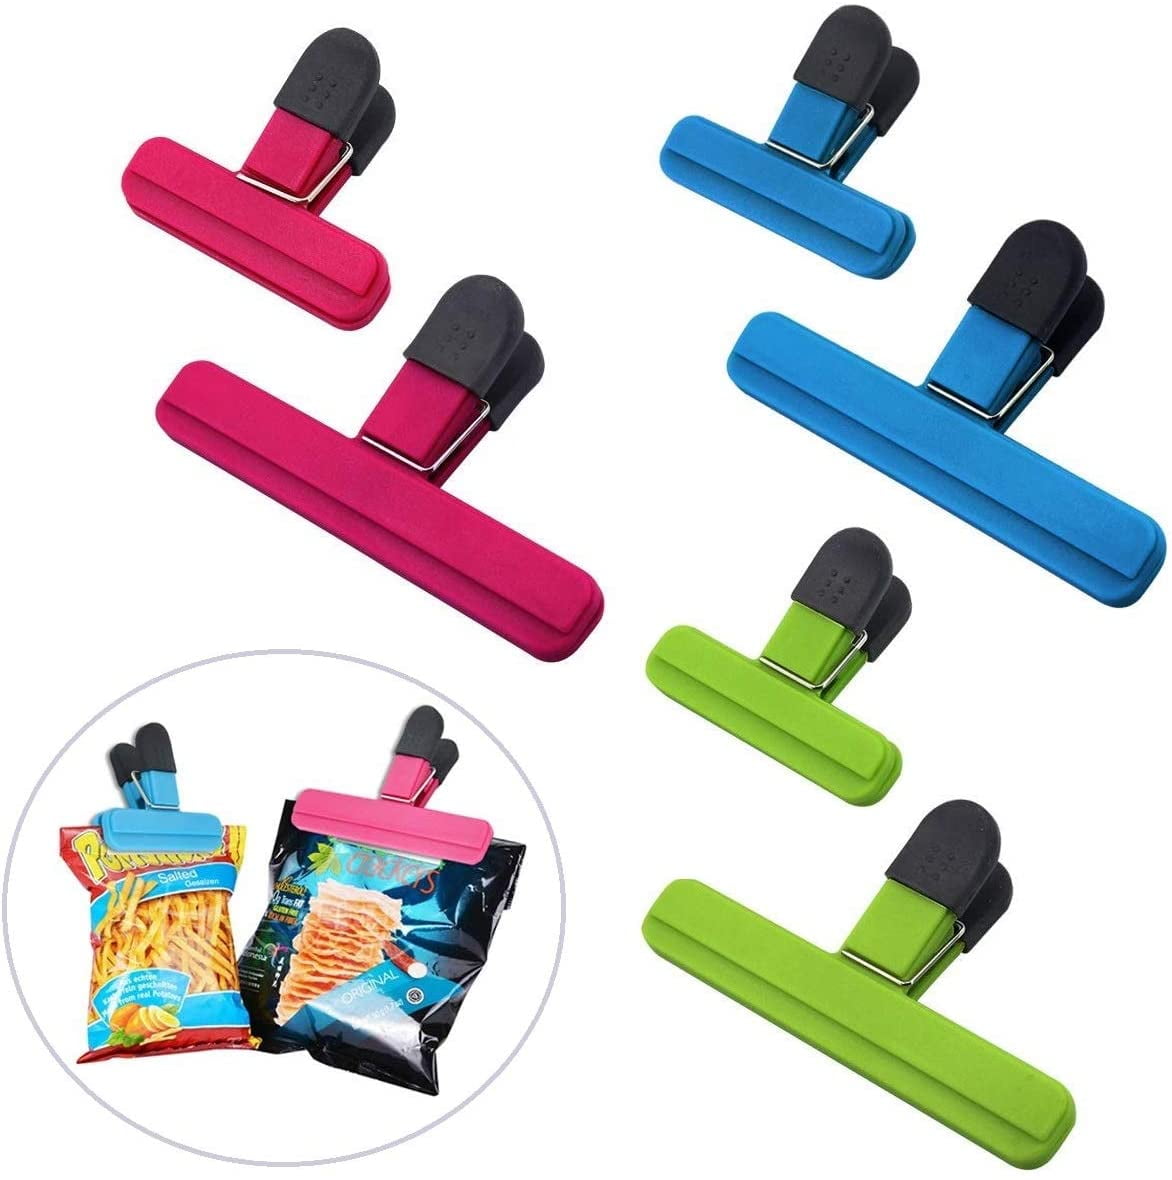 Spree [big Save!] Large Plastic Chip Food Clips Bag Sealing Clips with Good Grips Plastic Heavy Duty Air Tight Seal Grip Assorted Colors for Coffee Potato